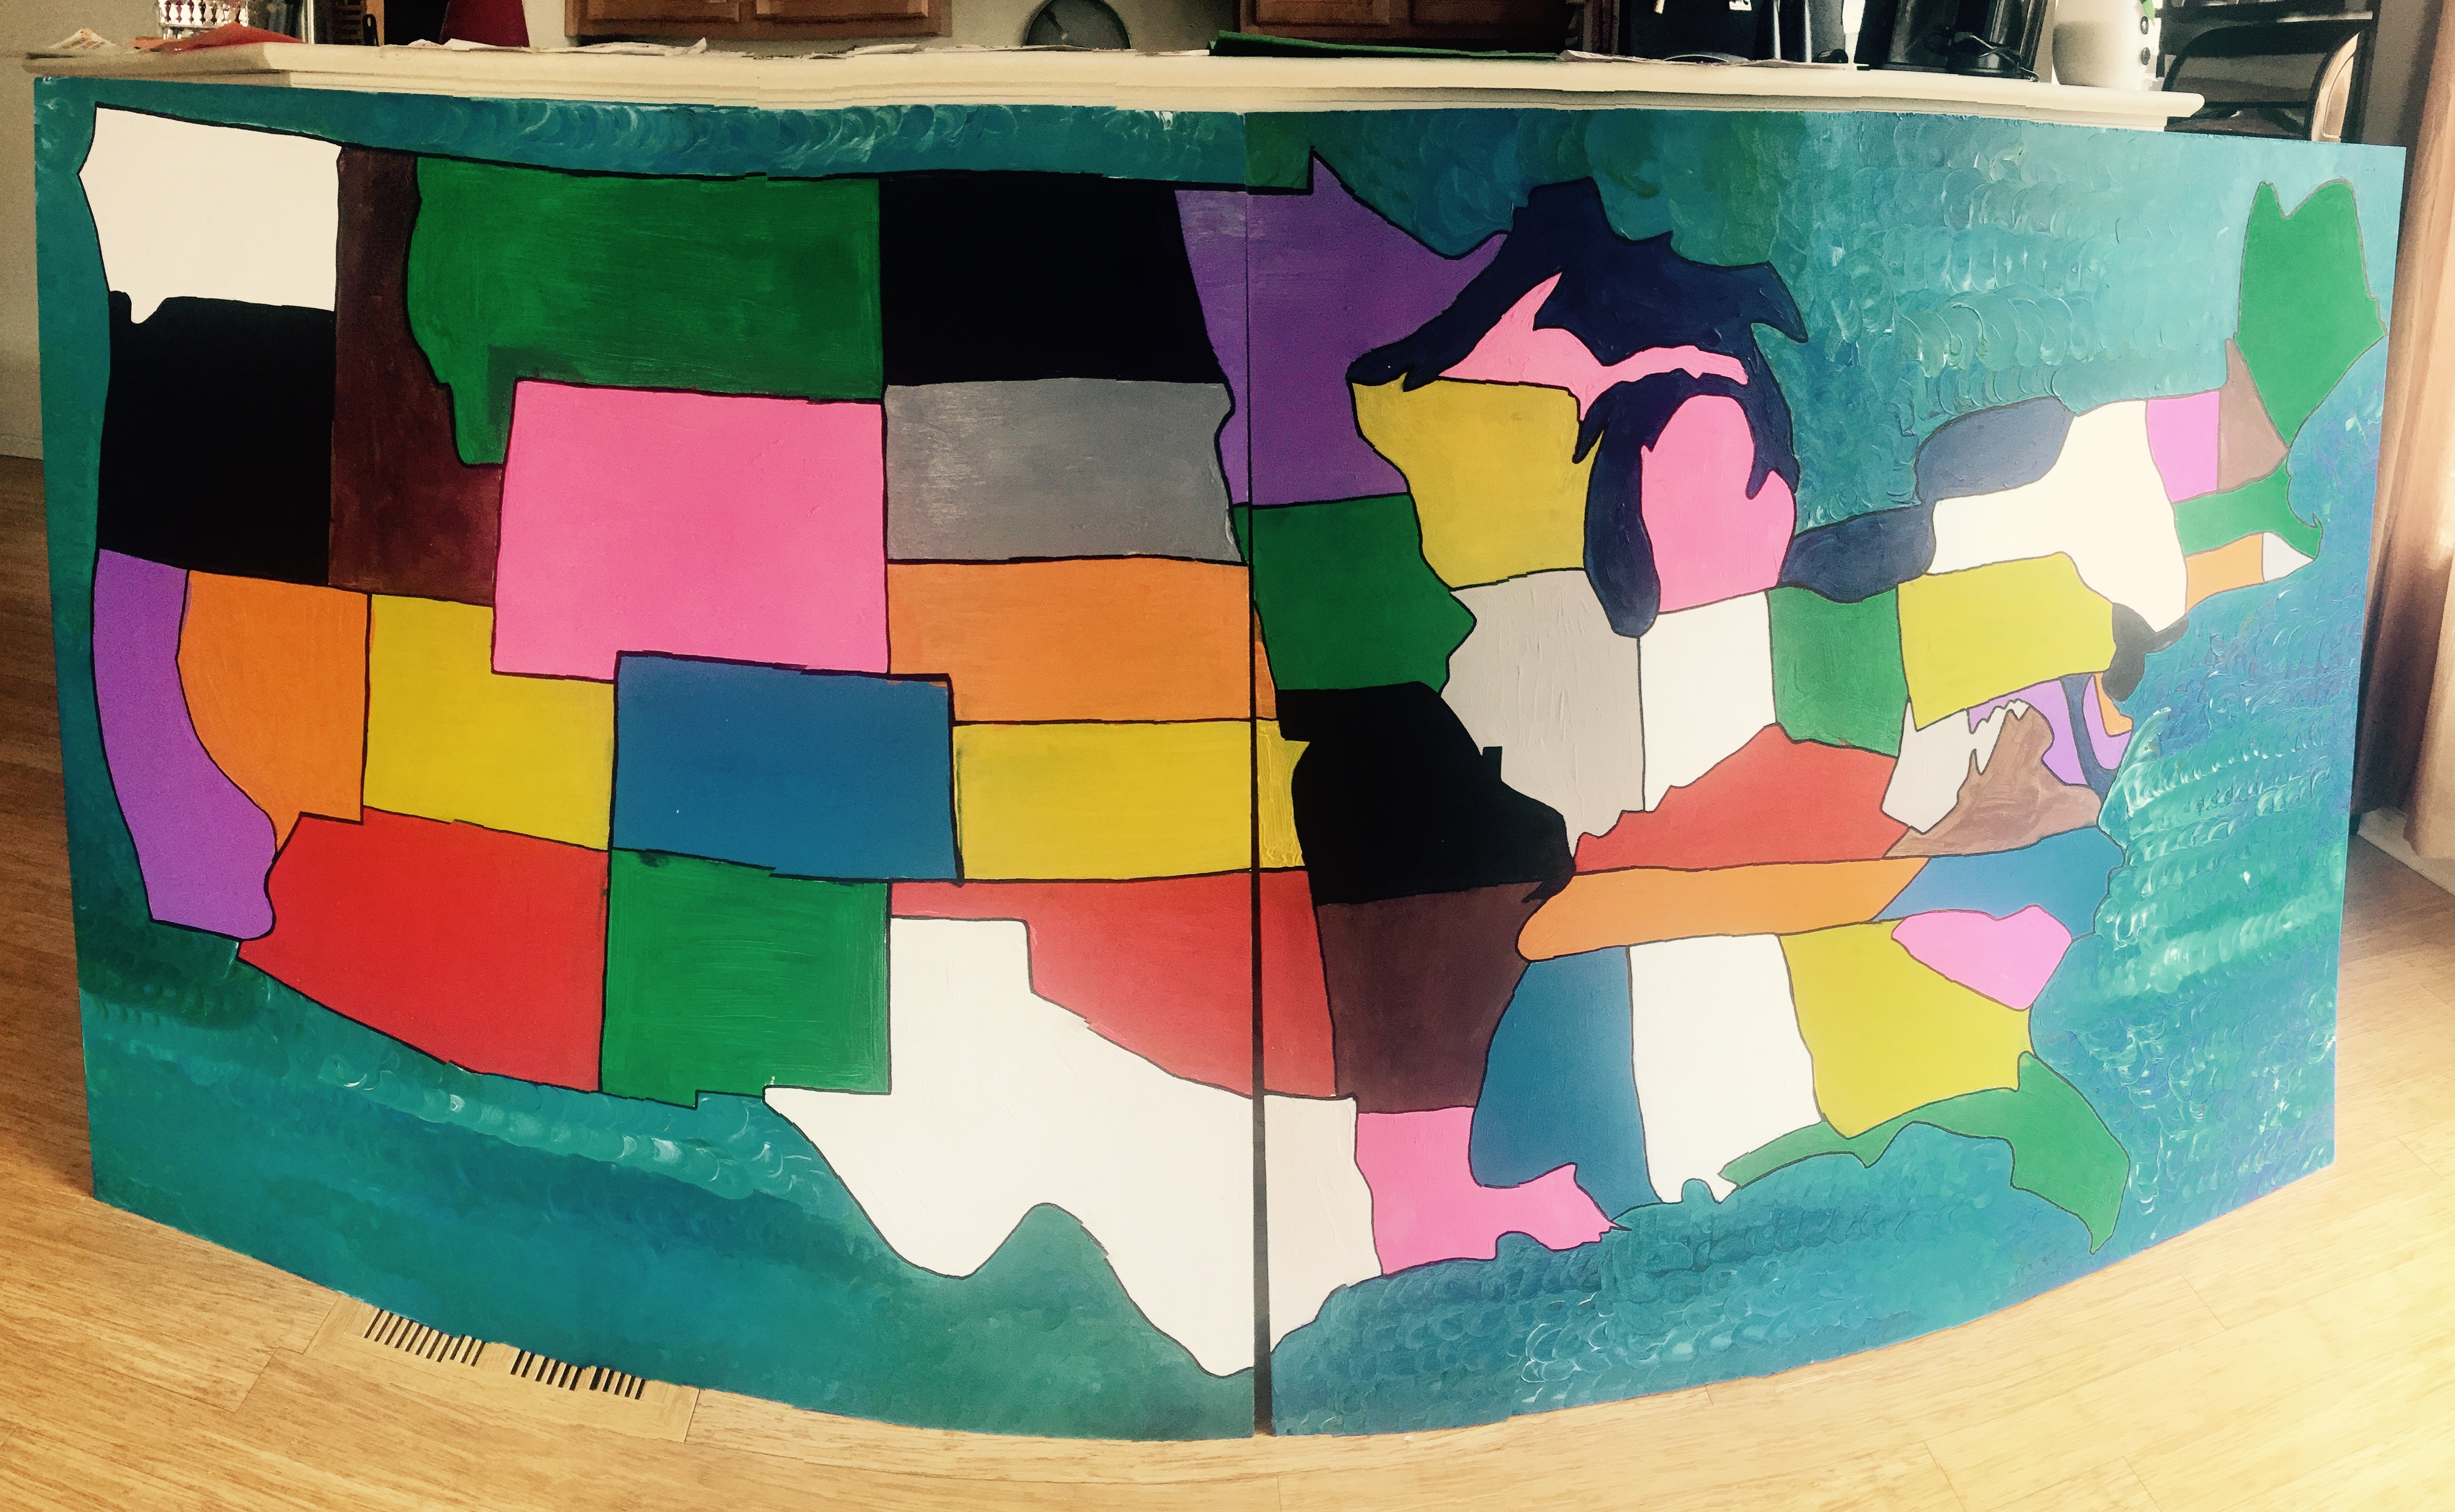 USA Map Ready for Bottle Caps